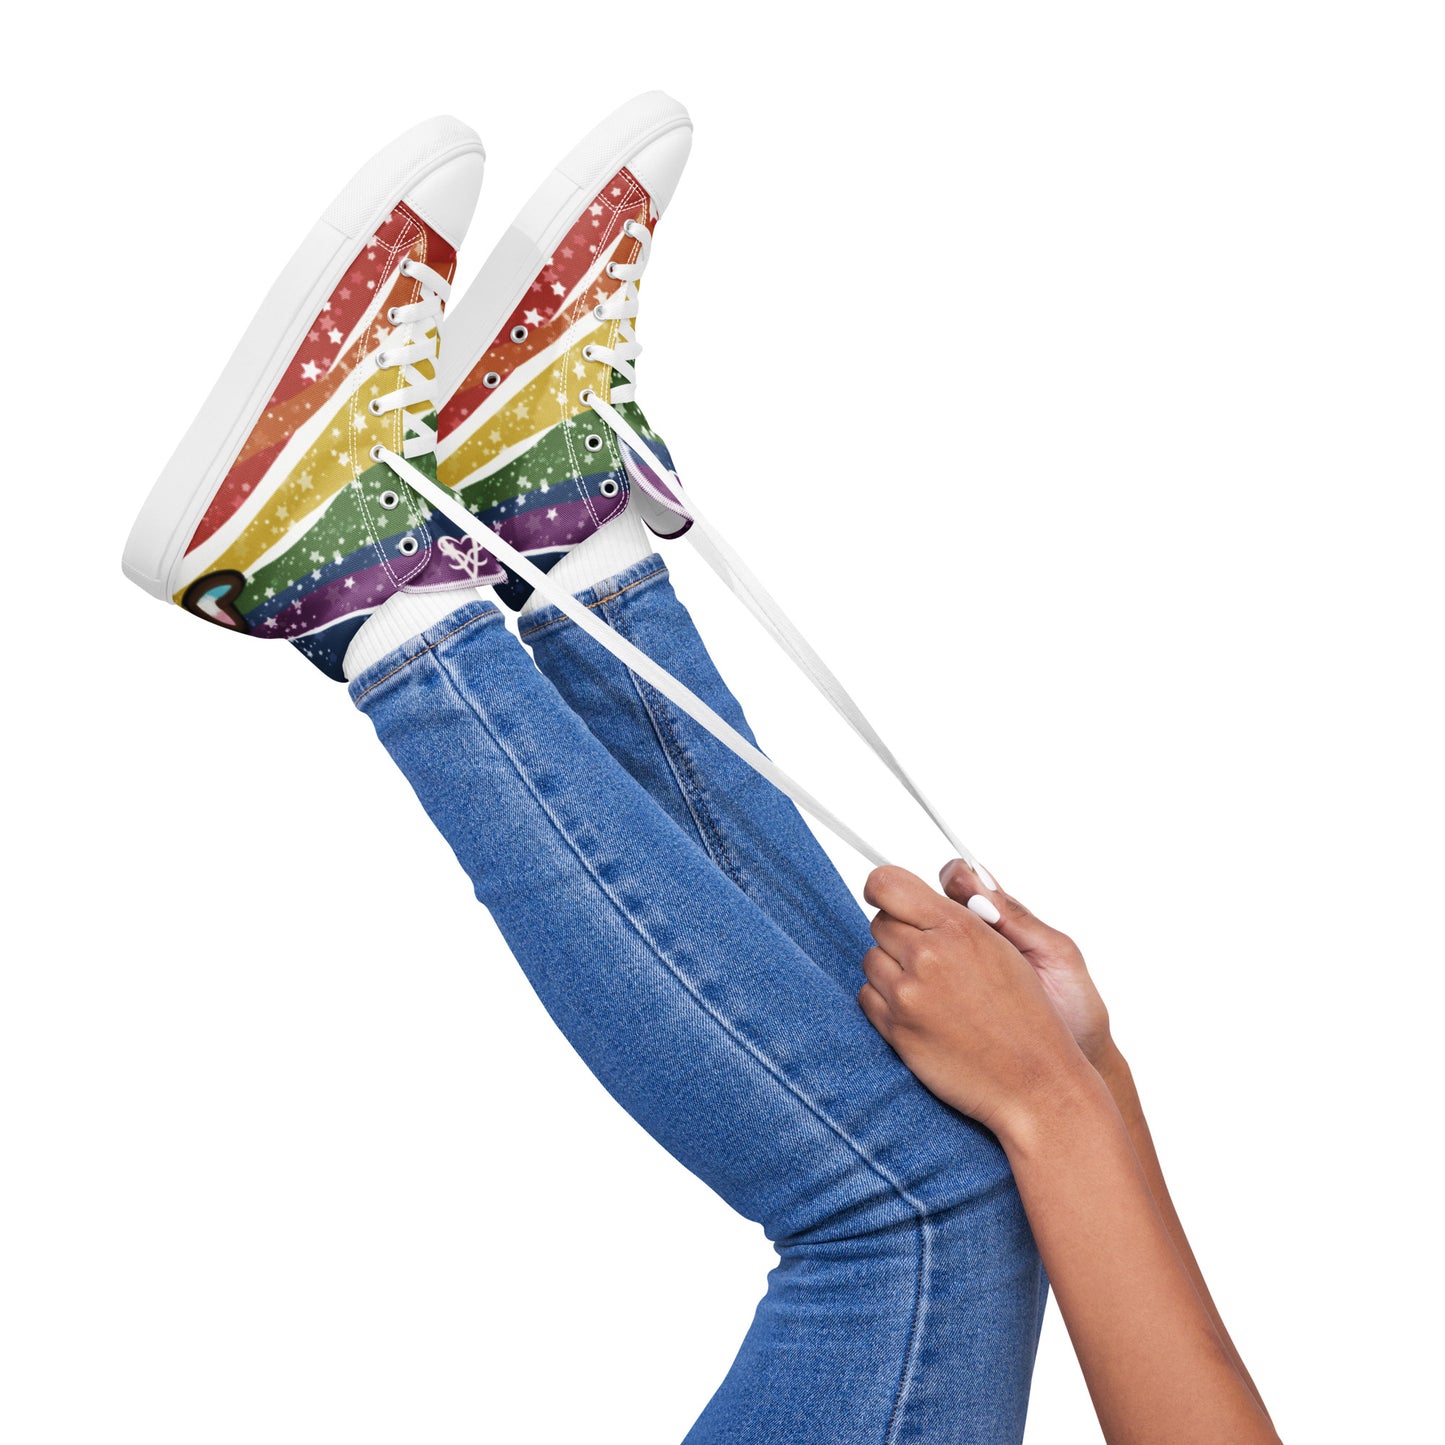 A model wears the Starry Rainbow pride high top shoes, waving them in the air and holding onto the laces.